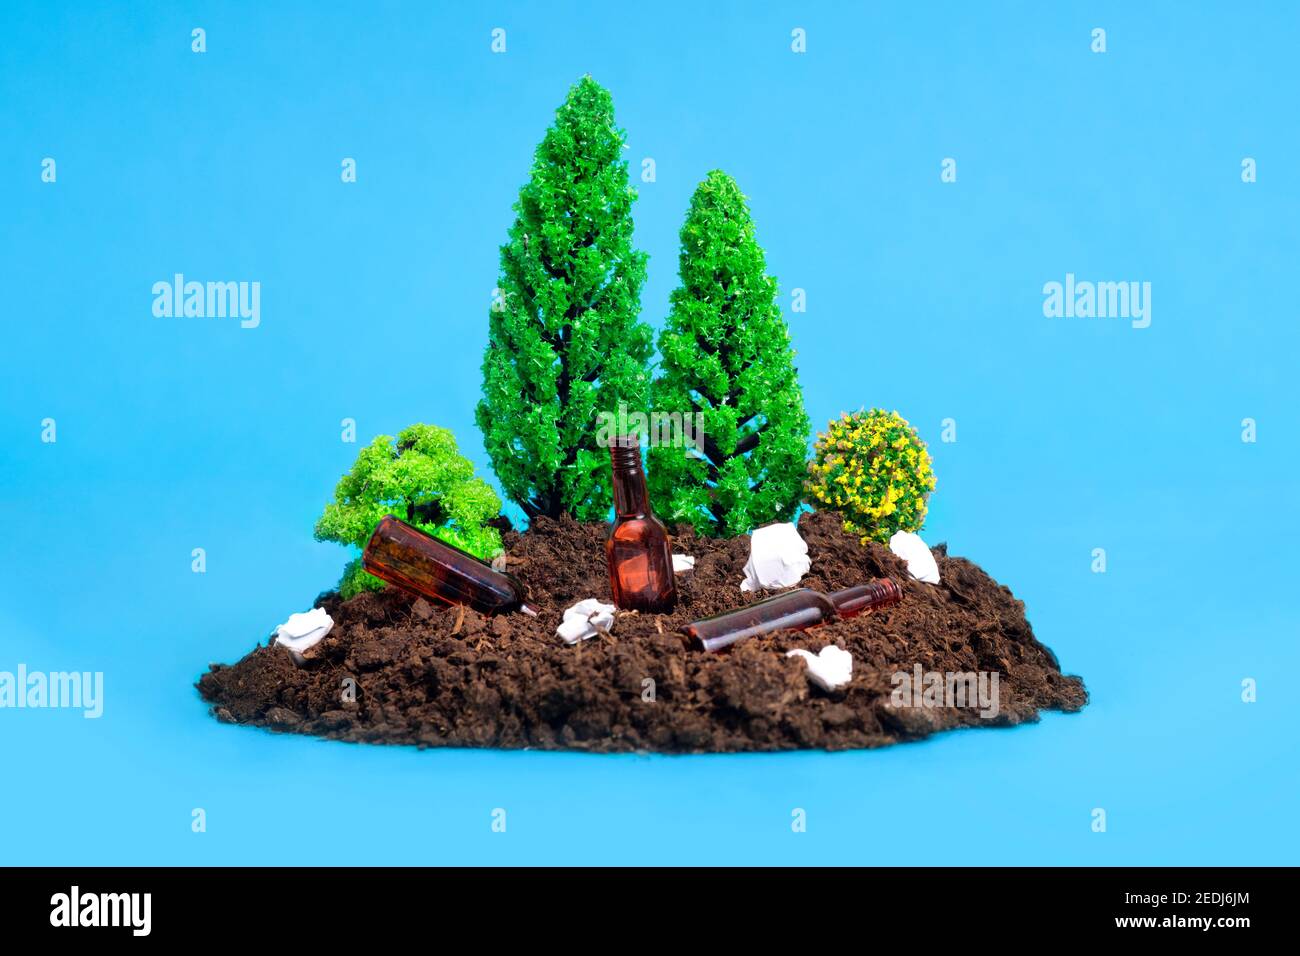 Miniature toy forest setup with paper rubbish, tiny glass bottles lying around.The concept of safe disposal of rubbish in forests and parks. Stock Photo